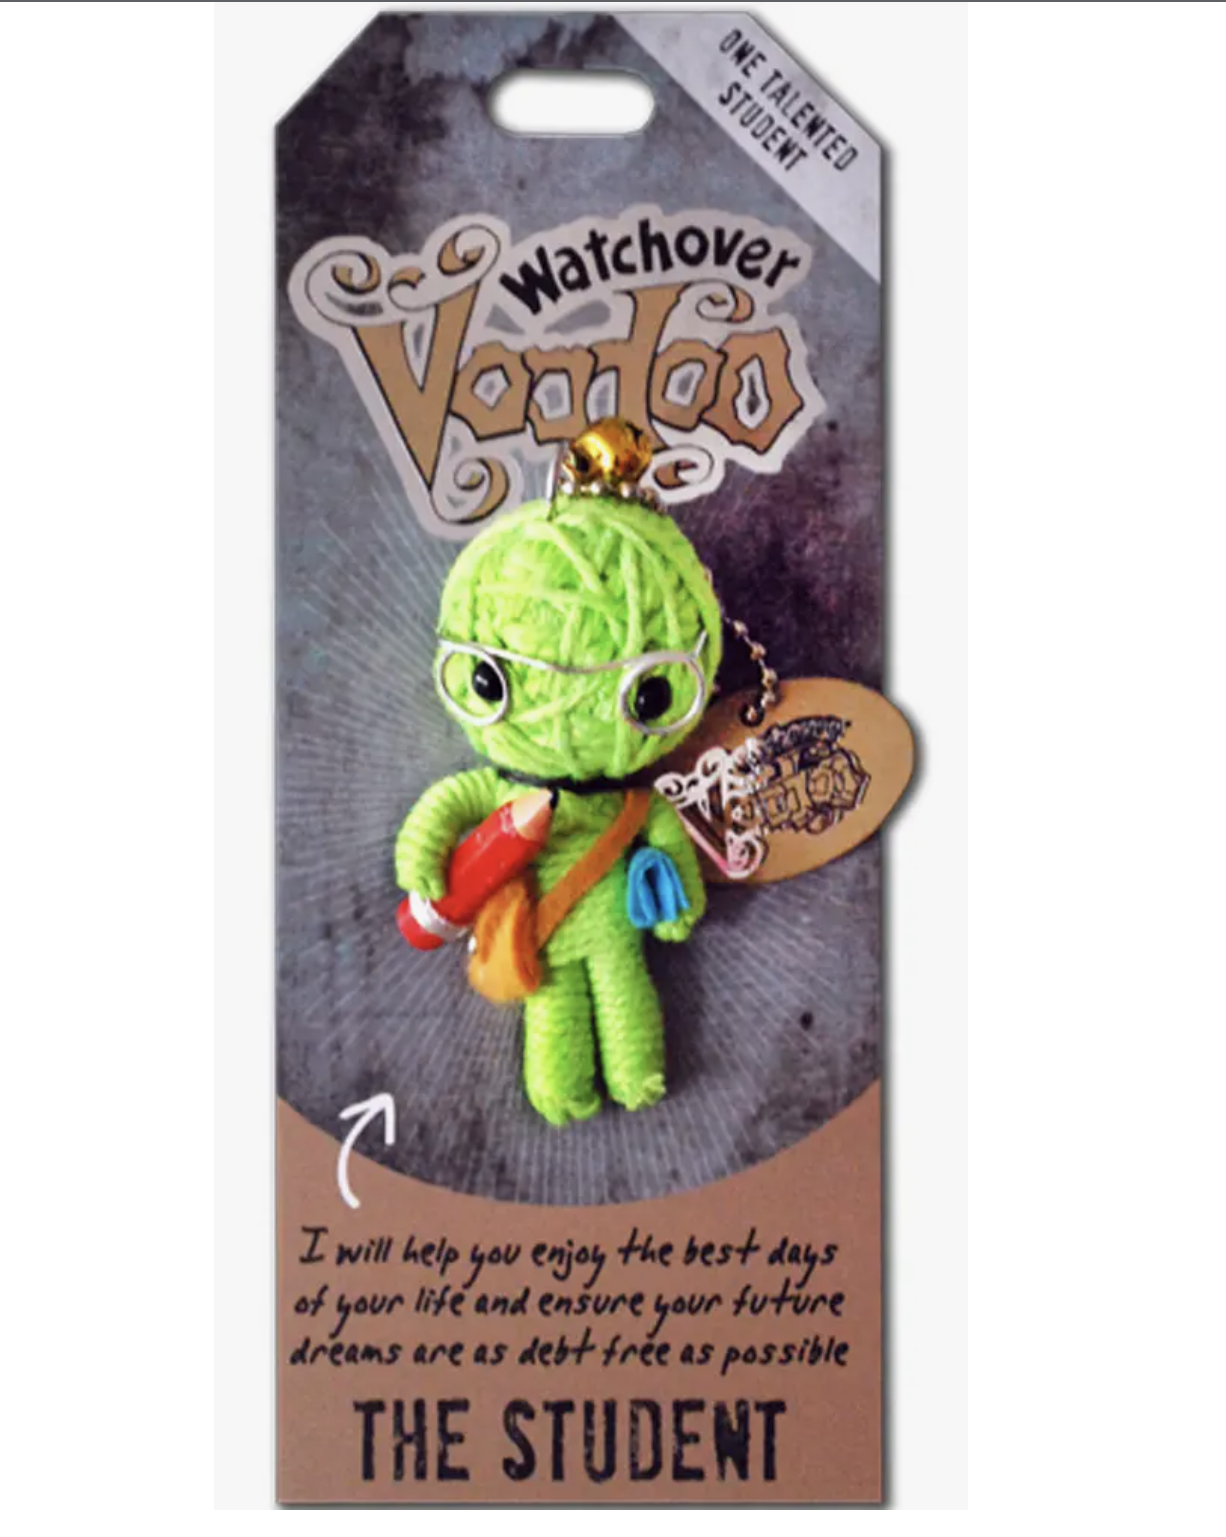 The Student Voodoo Doll